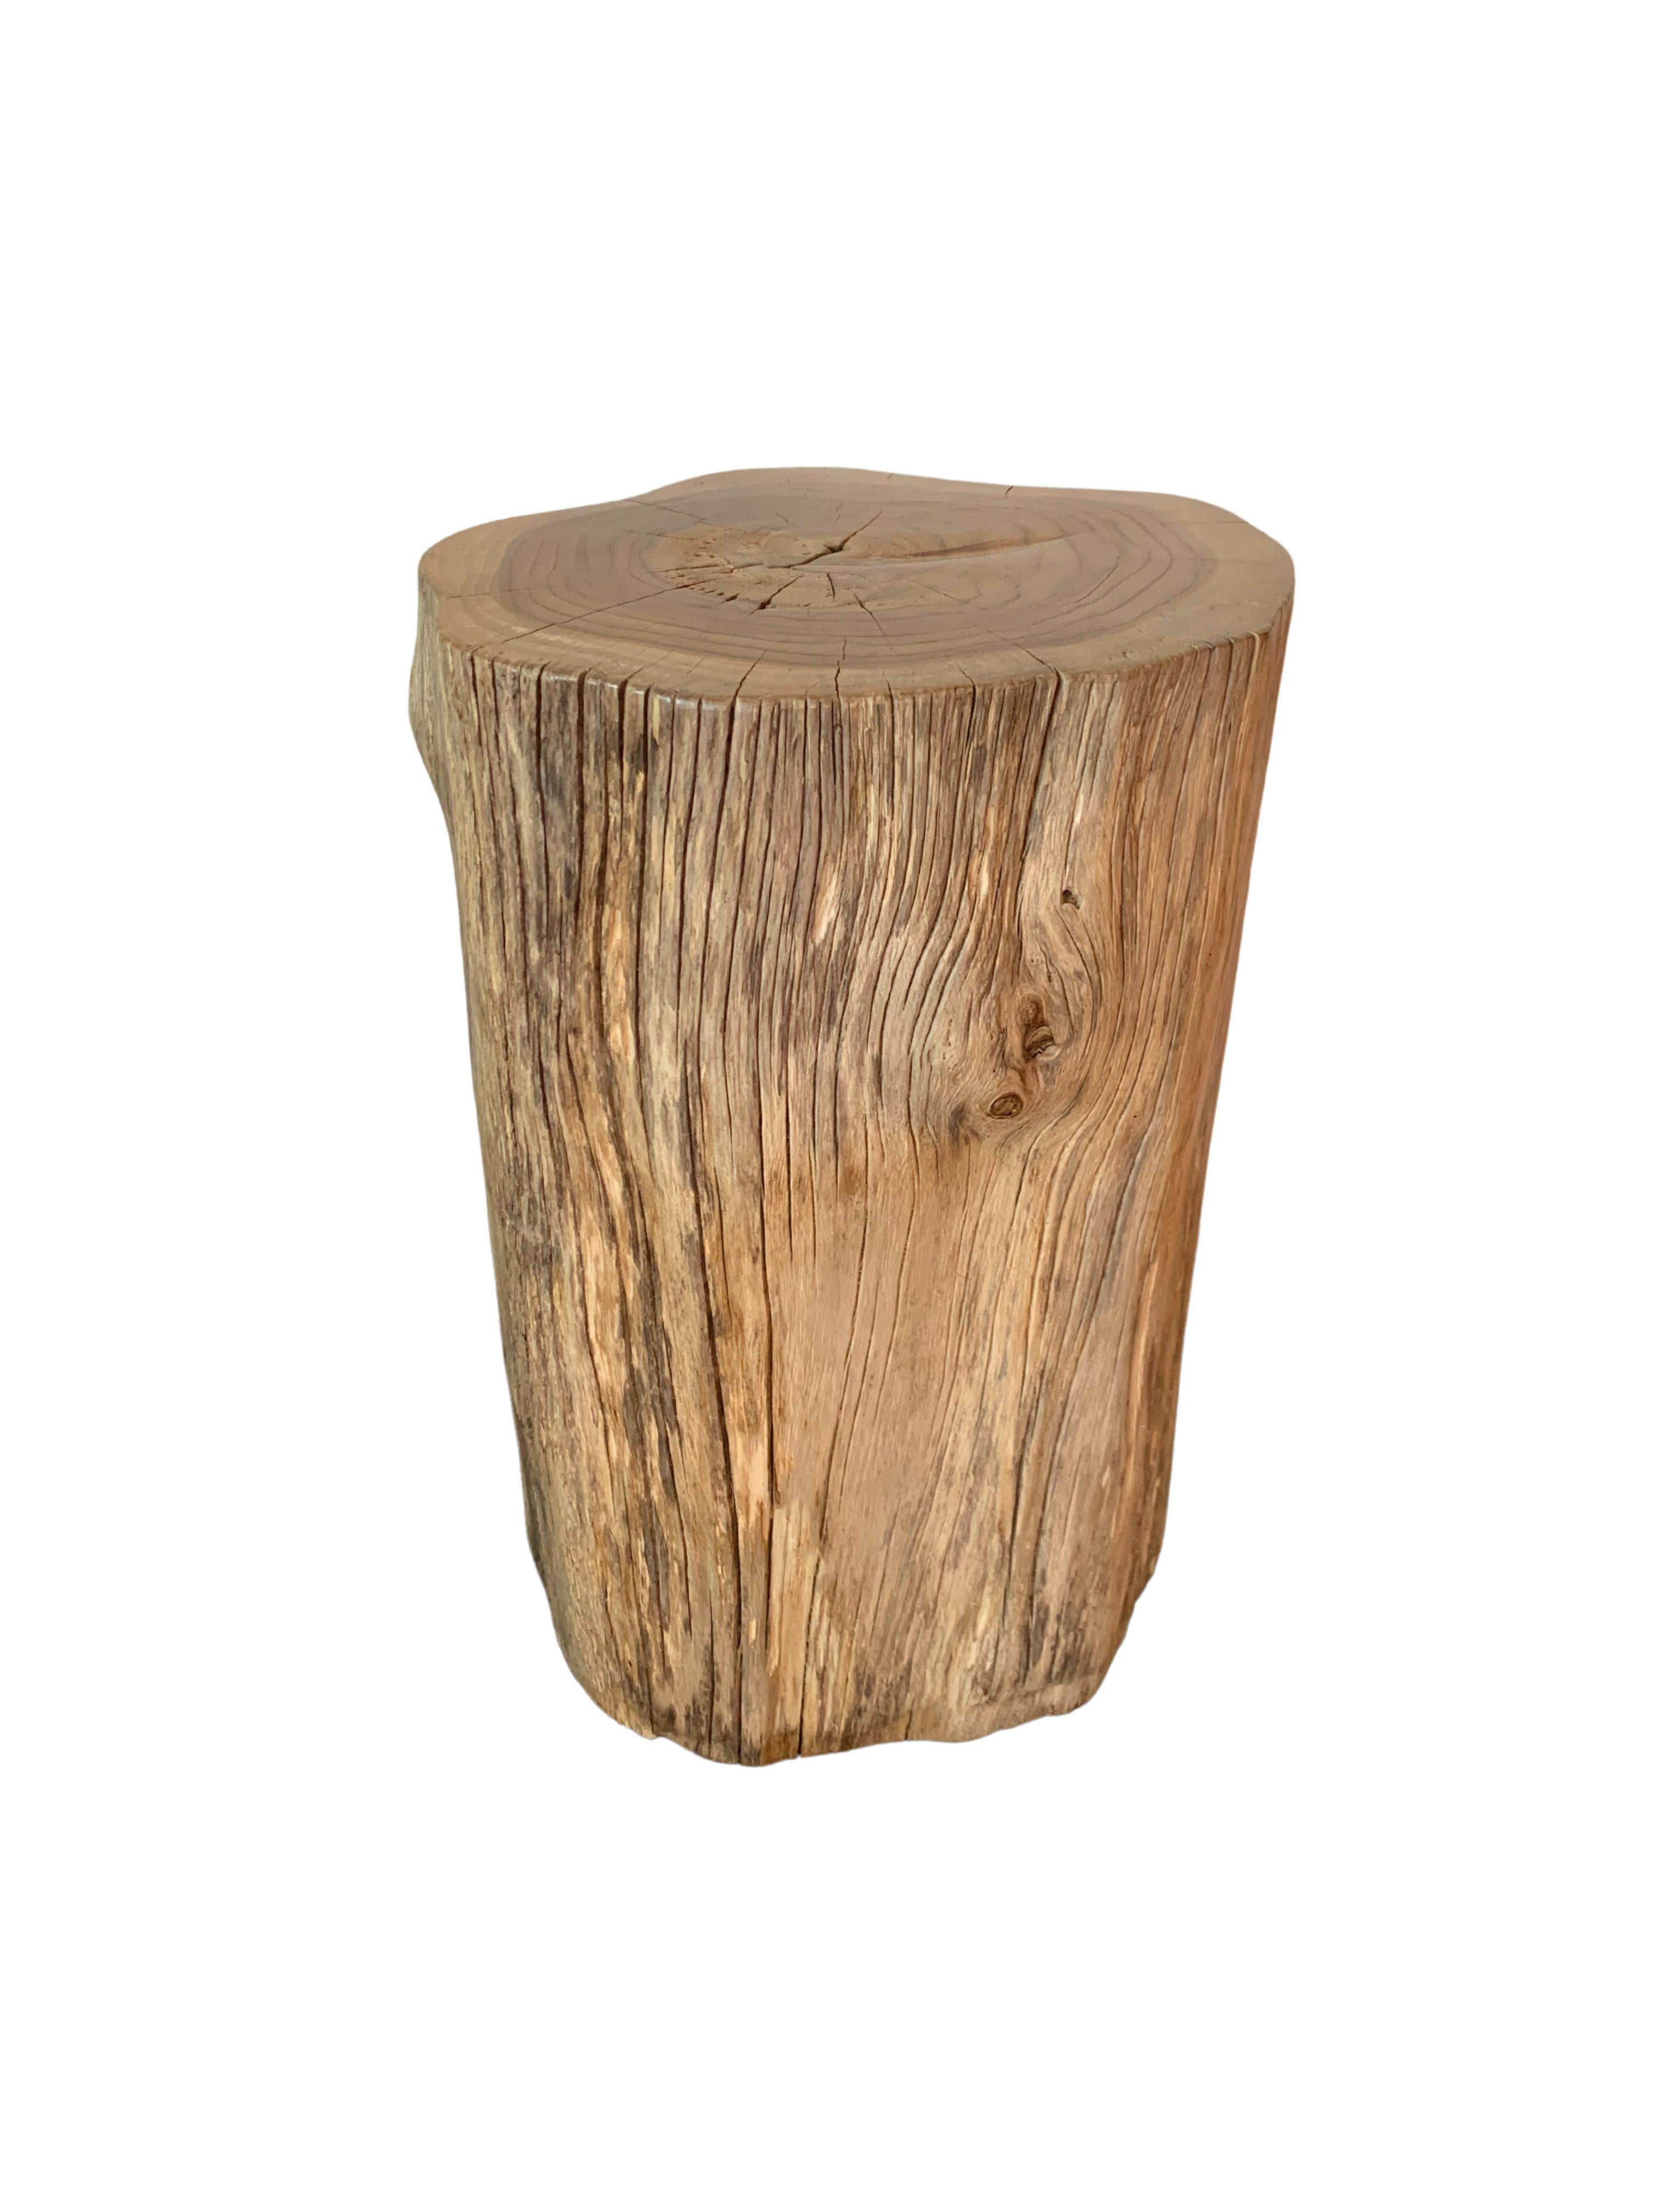 Hand-Crafted Tree Trunk Side Table Solid Teak Wood Natural Finish Modern Organic For Sale